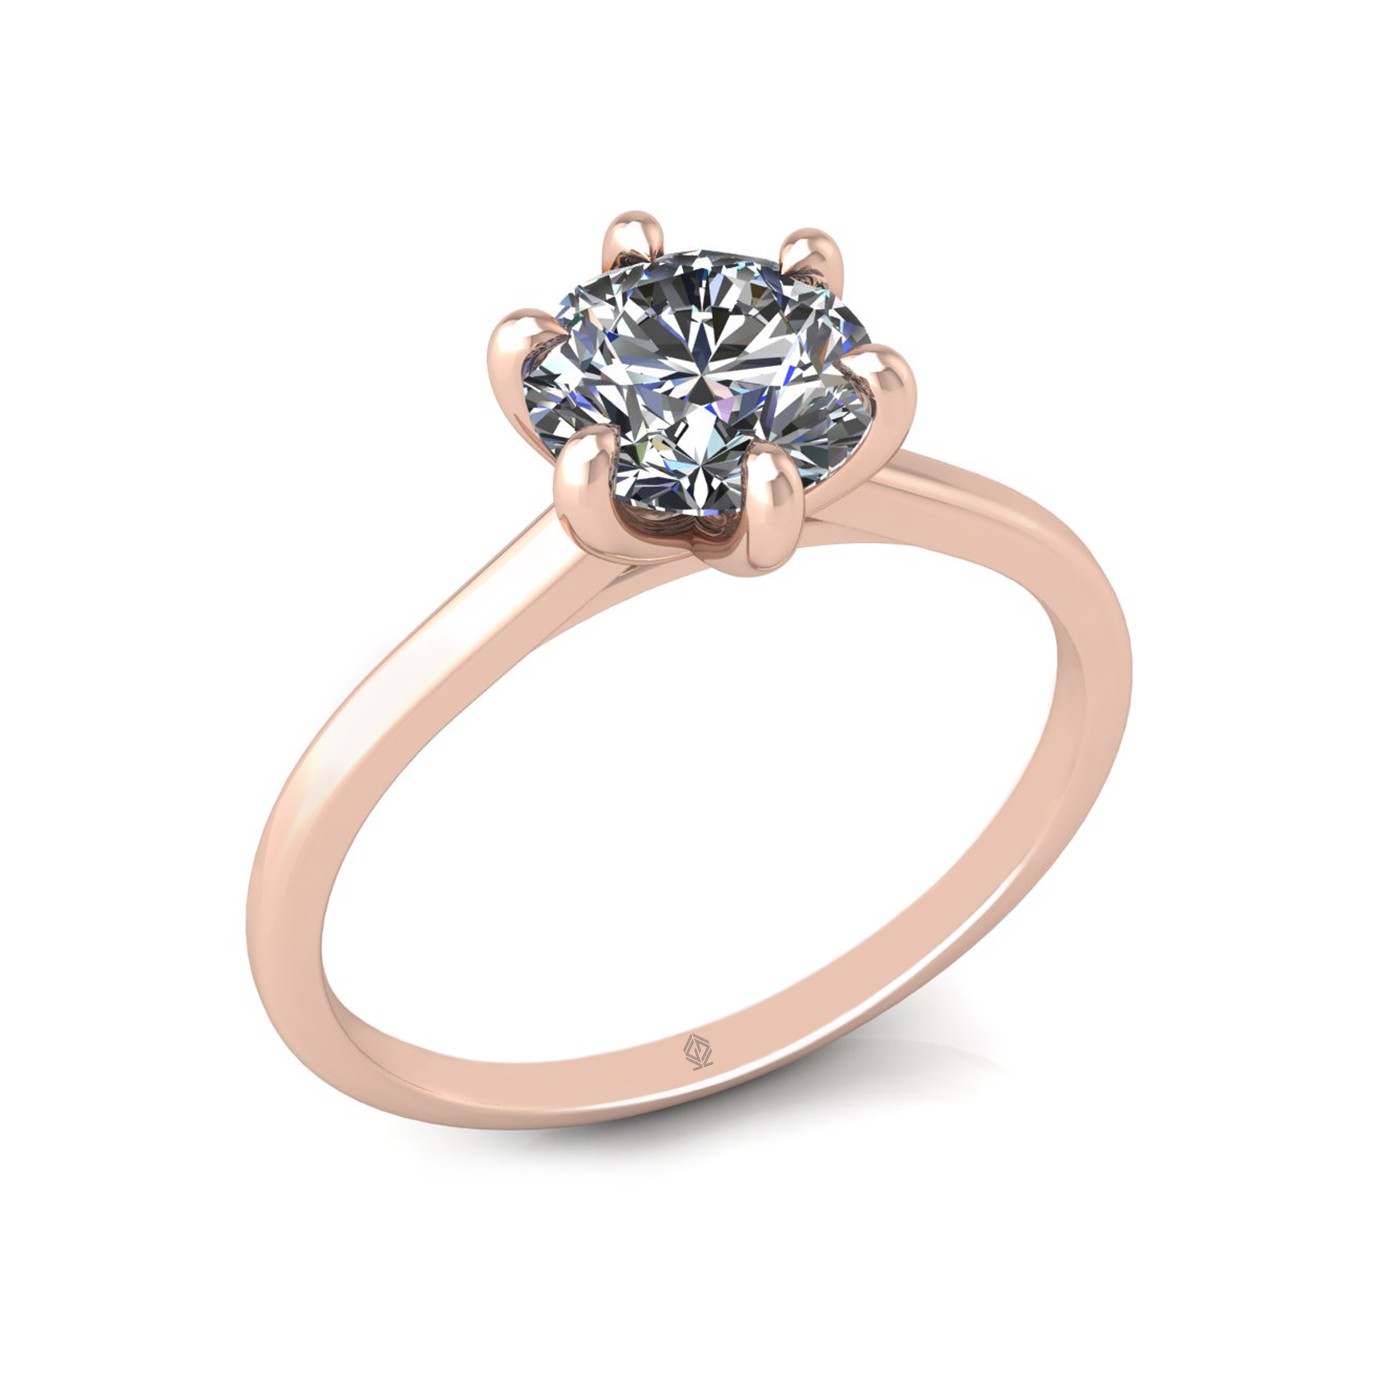 18k rose gold 1,00 ct 6 prongs solitaire round cut diamond engagement ring with whisper thin band